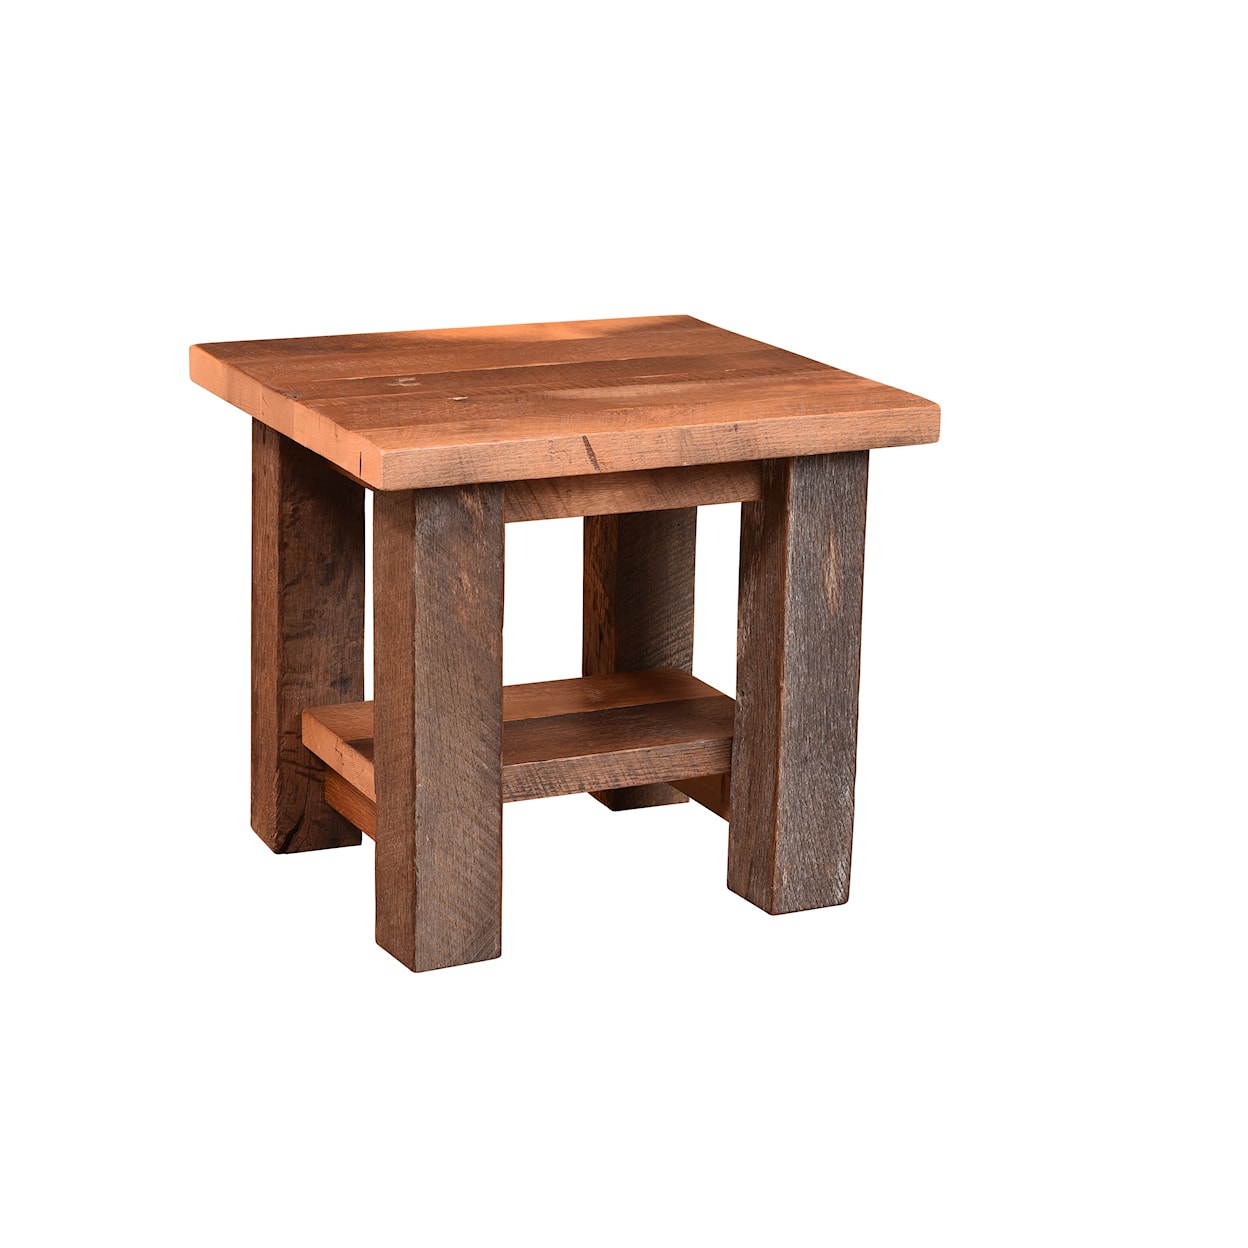 Urban Barnwood Furniture Almanzo Occasionals End Table